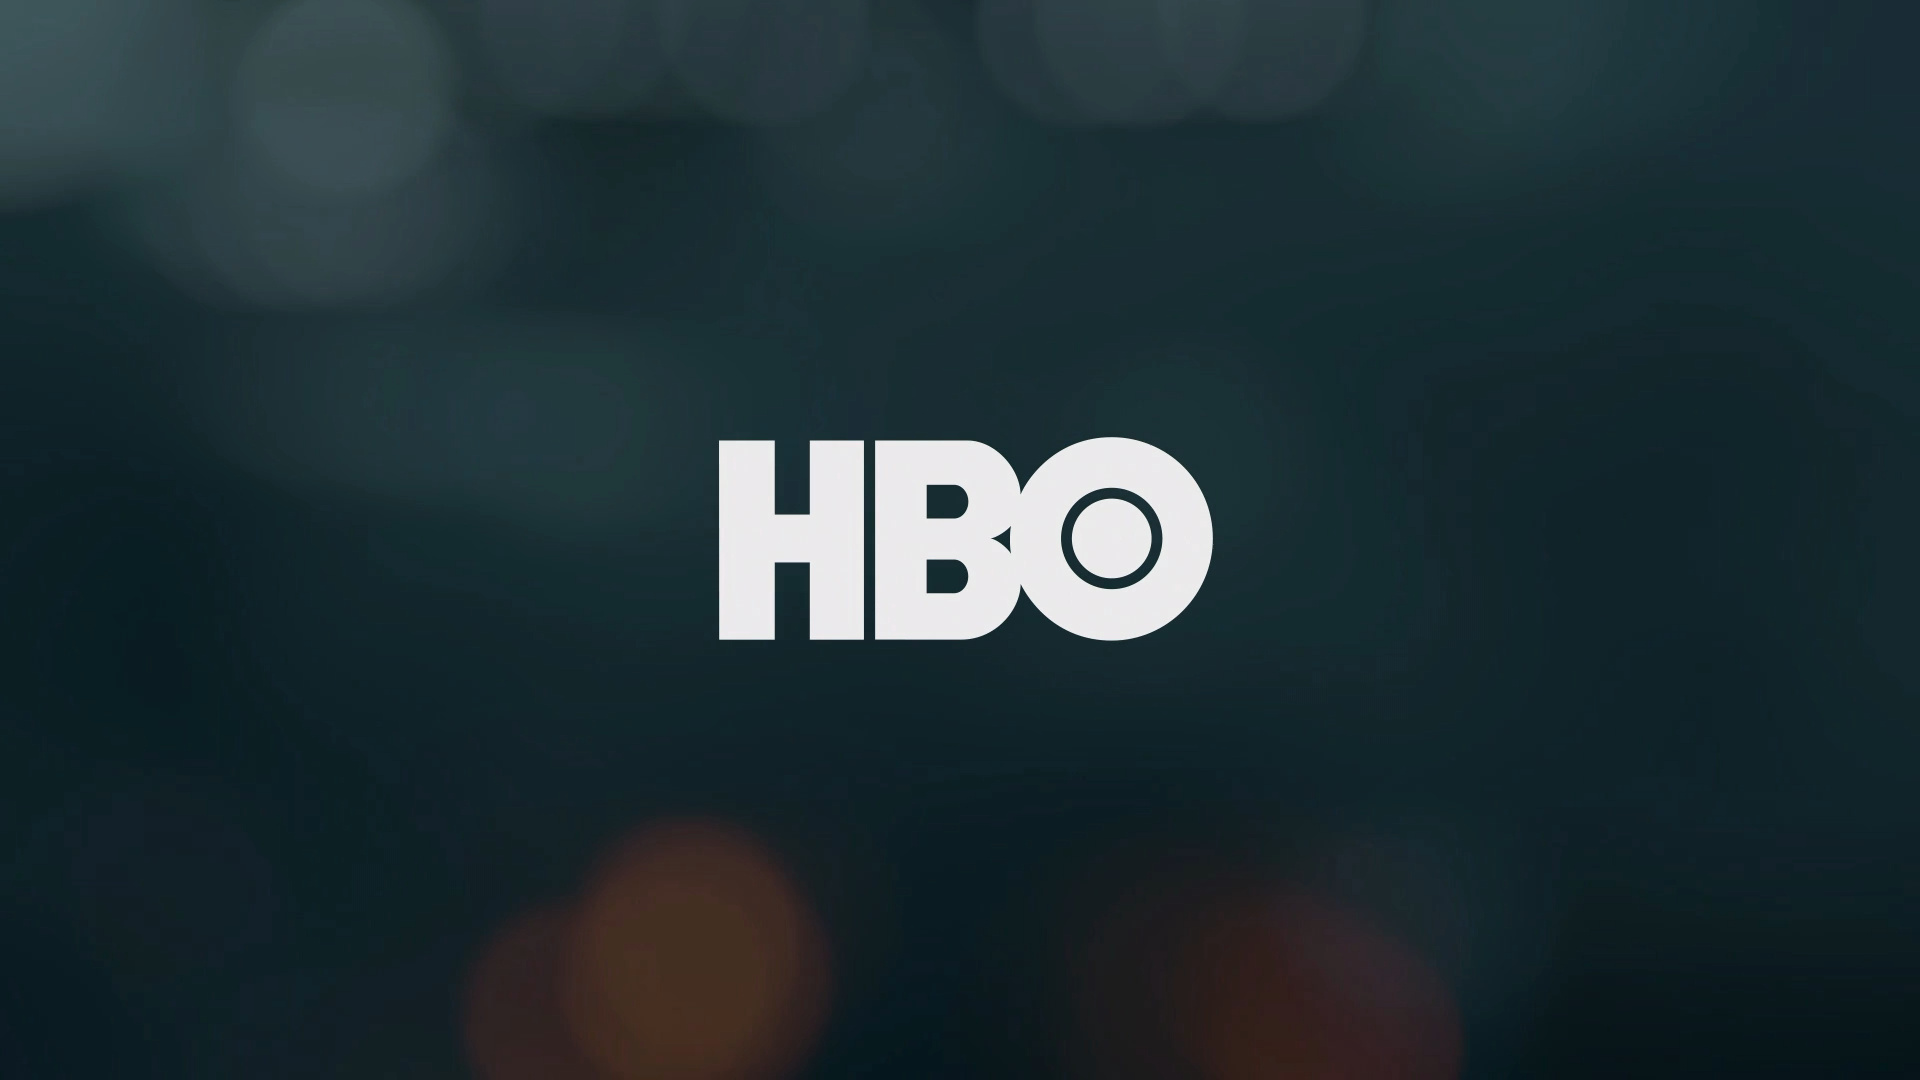 HBO: The US network from Warner Bros, Headquarters: 30 Hudson Yards, New York City. 1920x1080 Full HD Wallpaper.